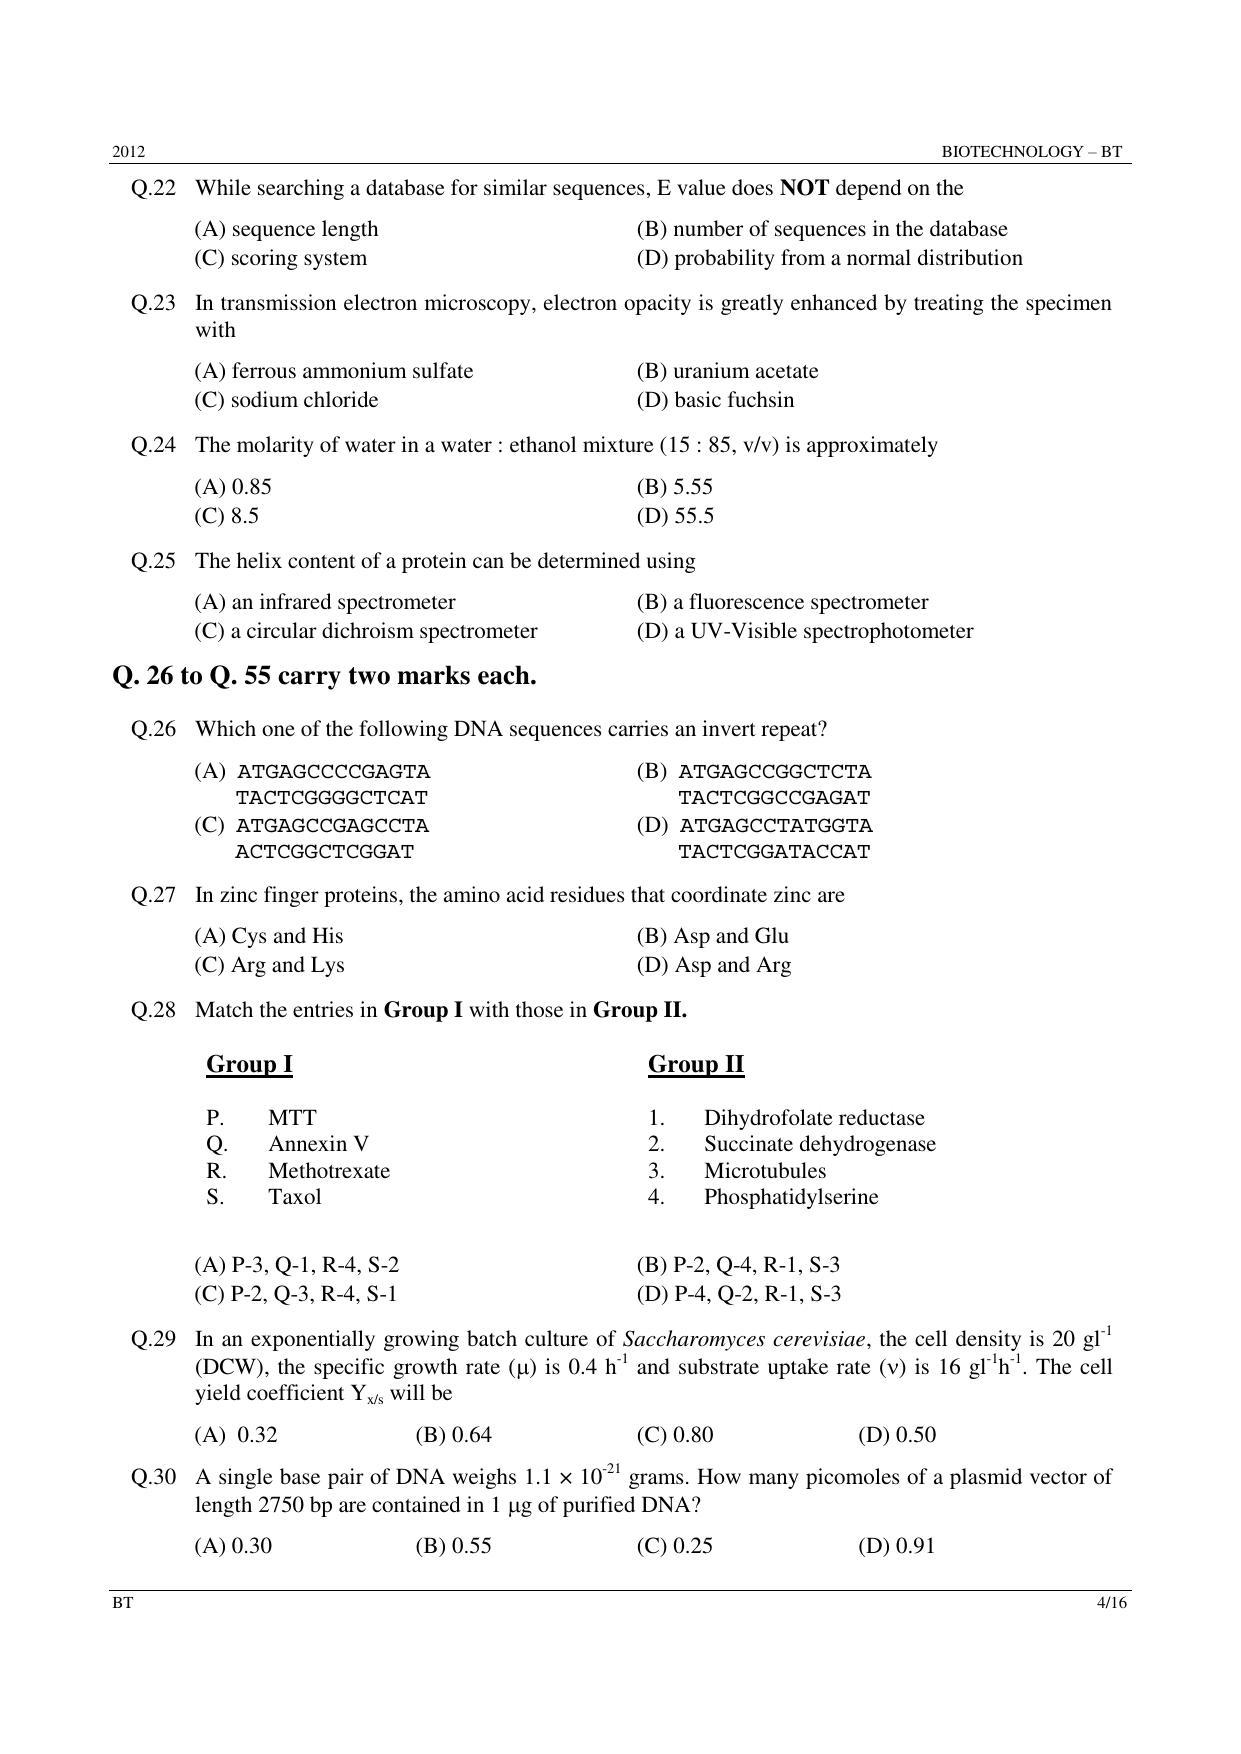 GATE 2012 Biotechnology (BT) Question Paper with Answer Key - Page 4